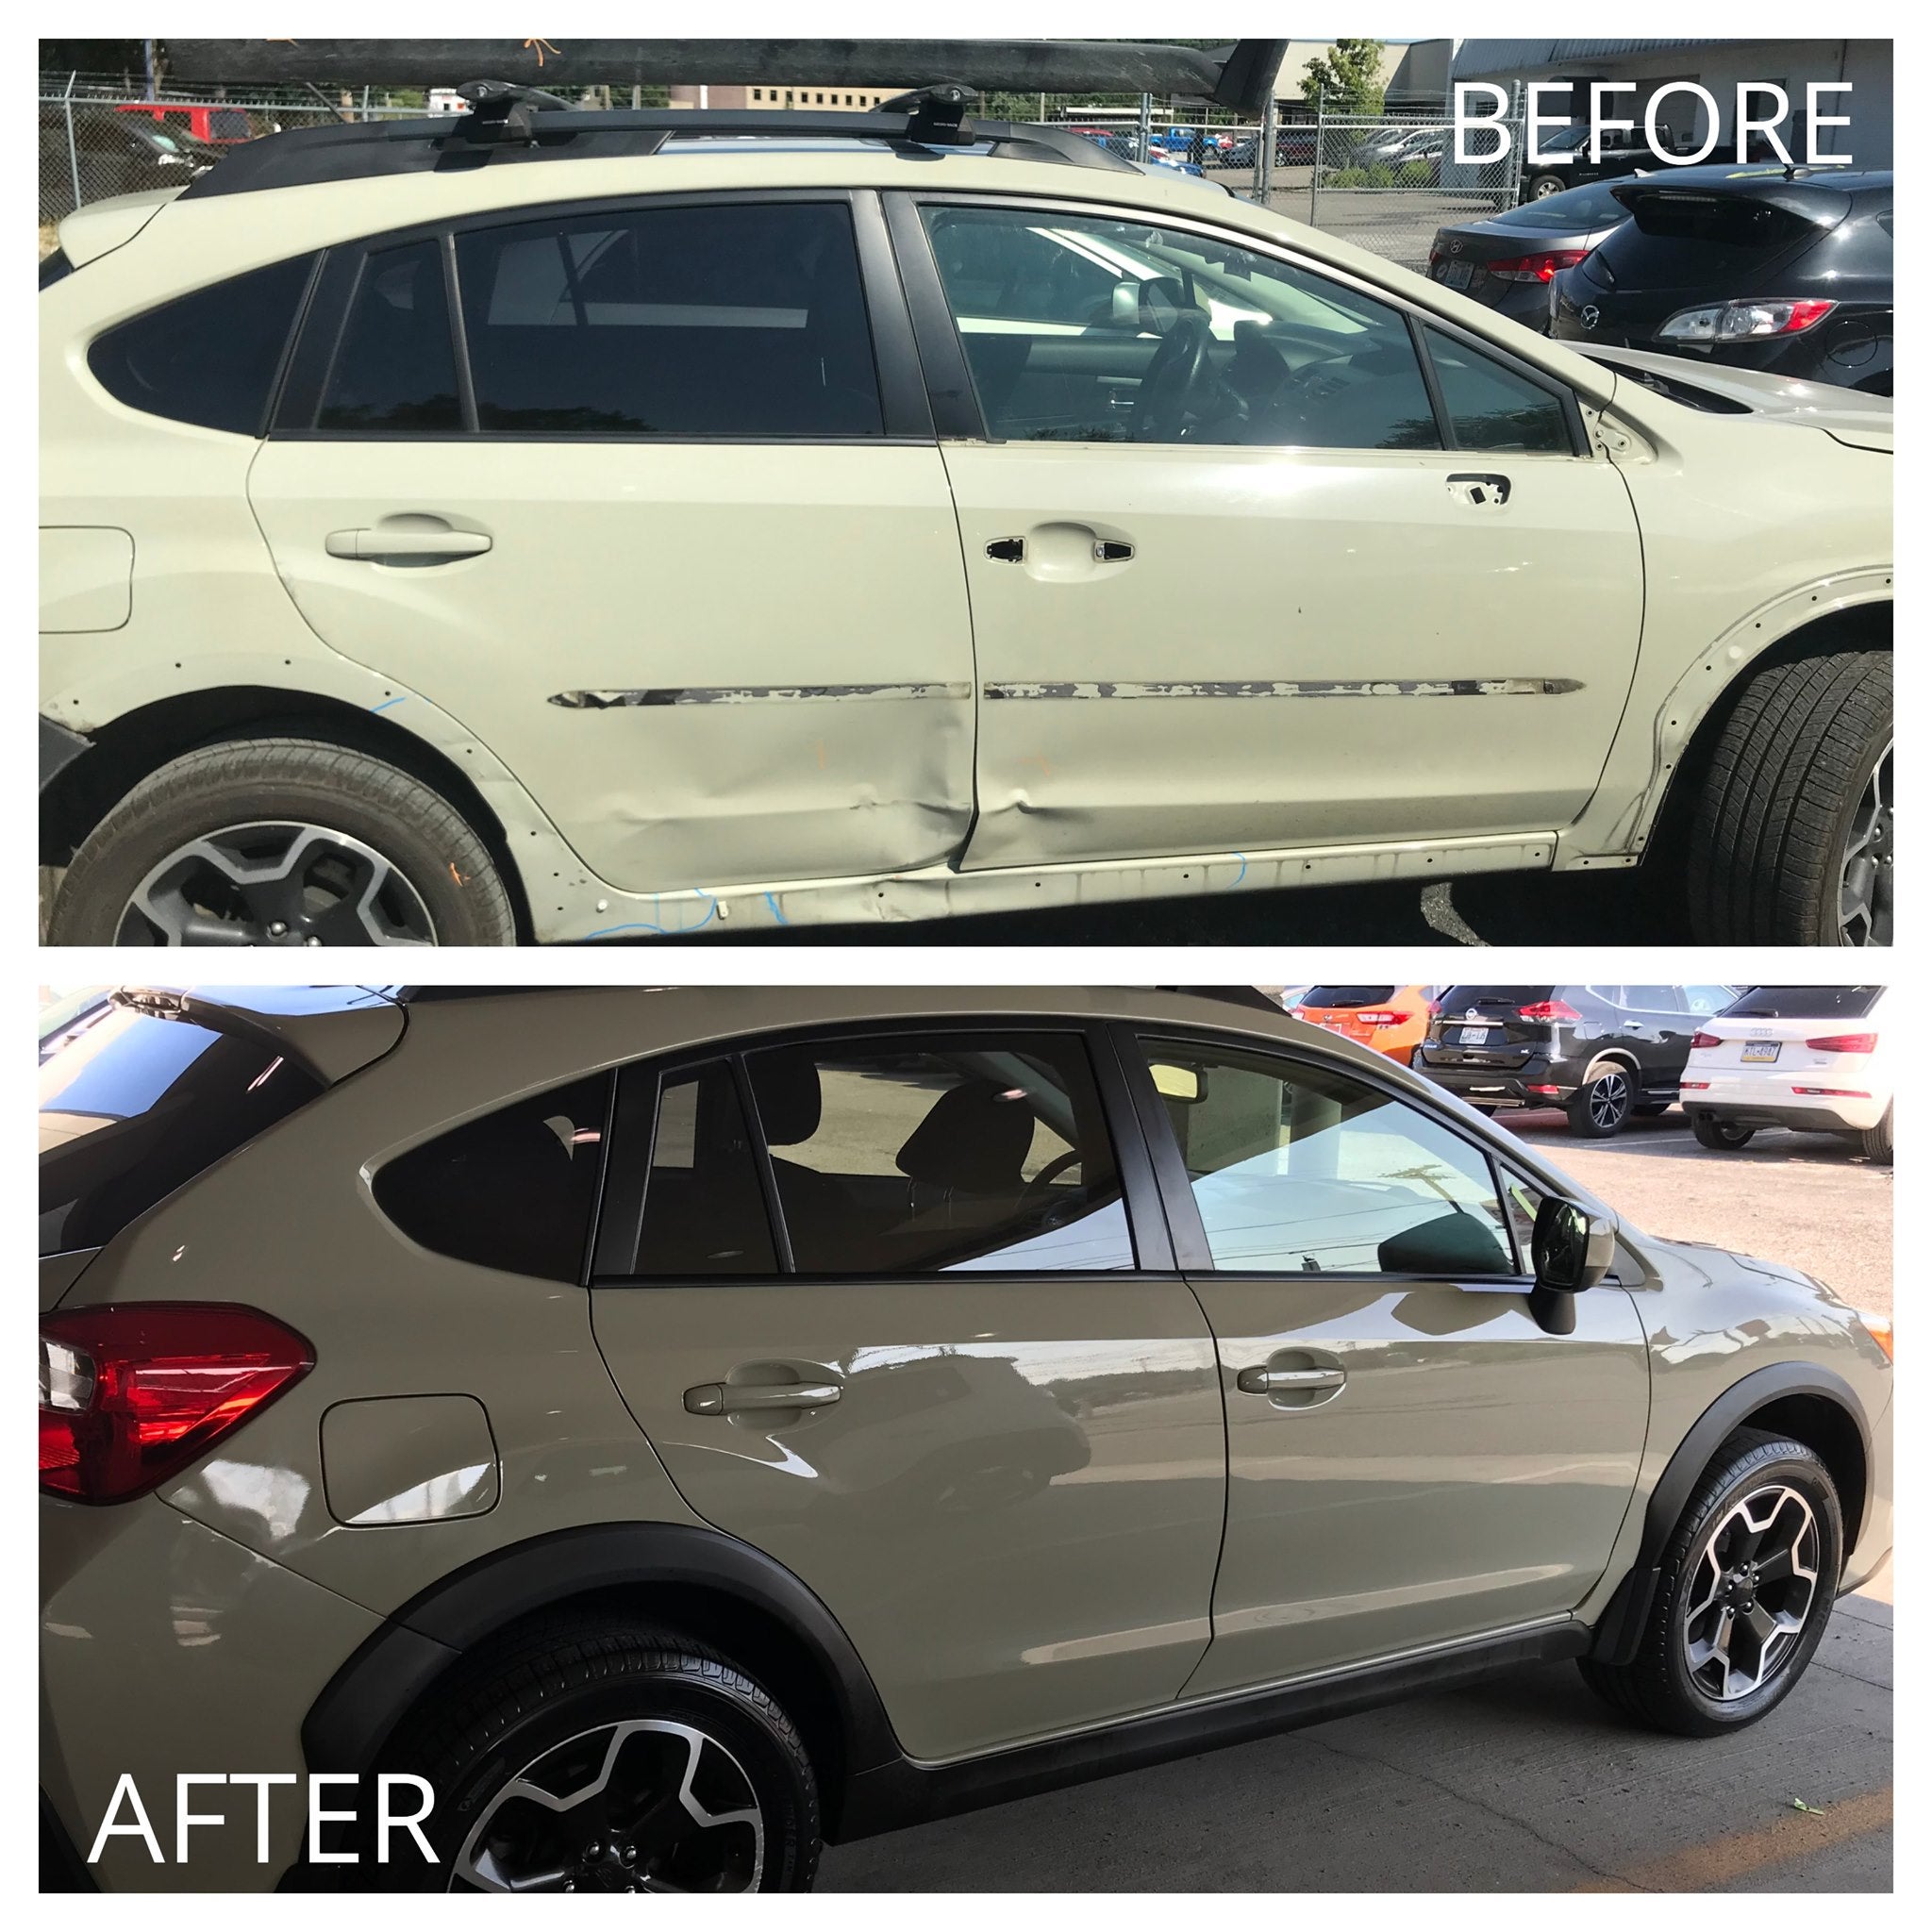 Body Shop Before and After